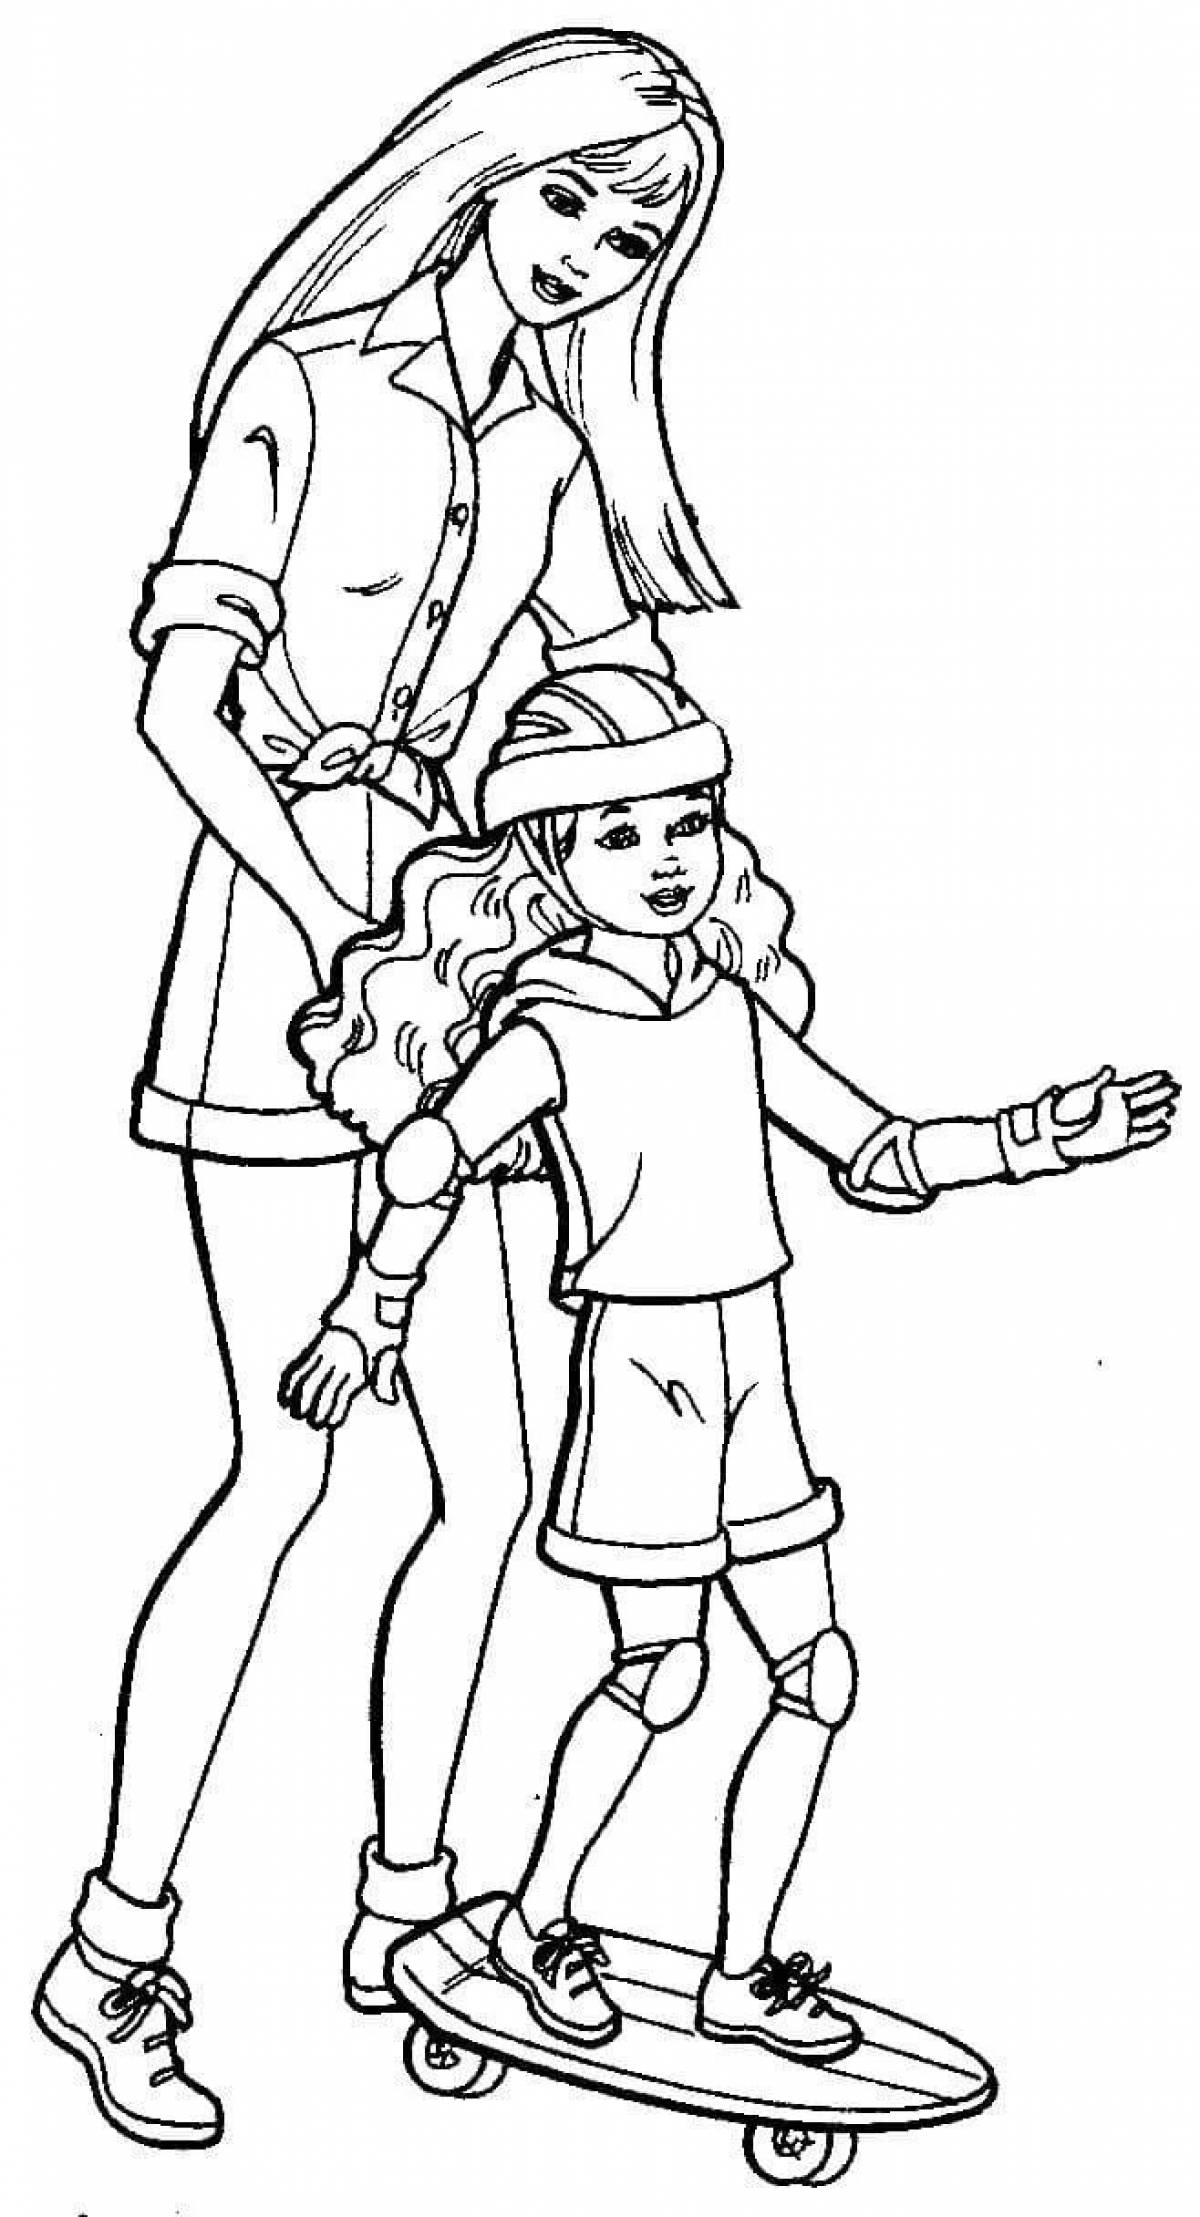 Gorgeous daughter coloring page